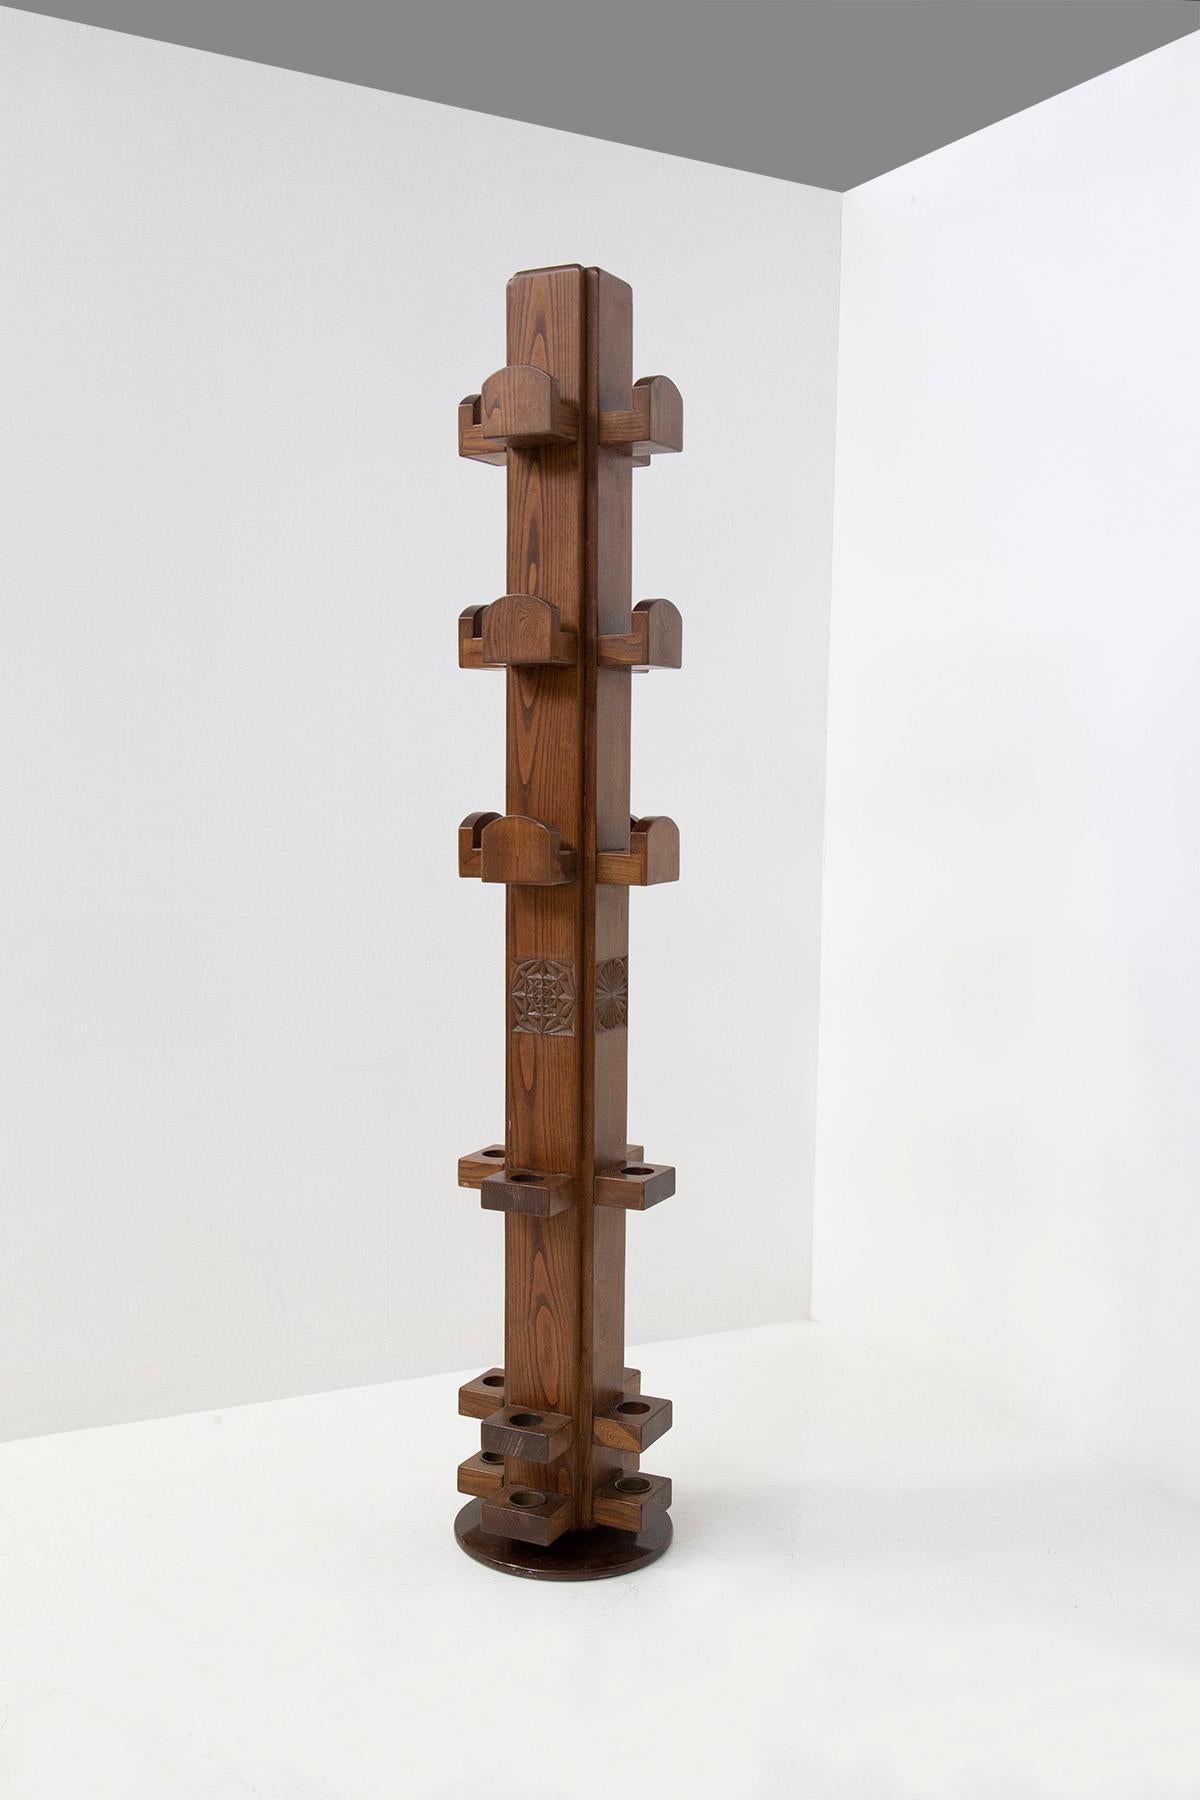 Imposing and important clothes rack totem designed by Giuseppe Rivadossi in the 1970s. The entire garment rack is made of carved and patinated Oak Wood, polished finish. At the base we have a very solid painted metal plate that acts as a pivot to